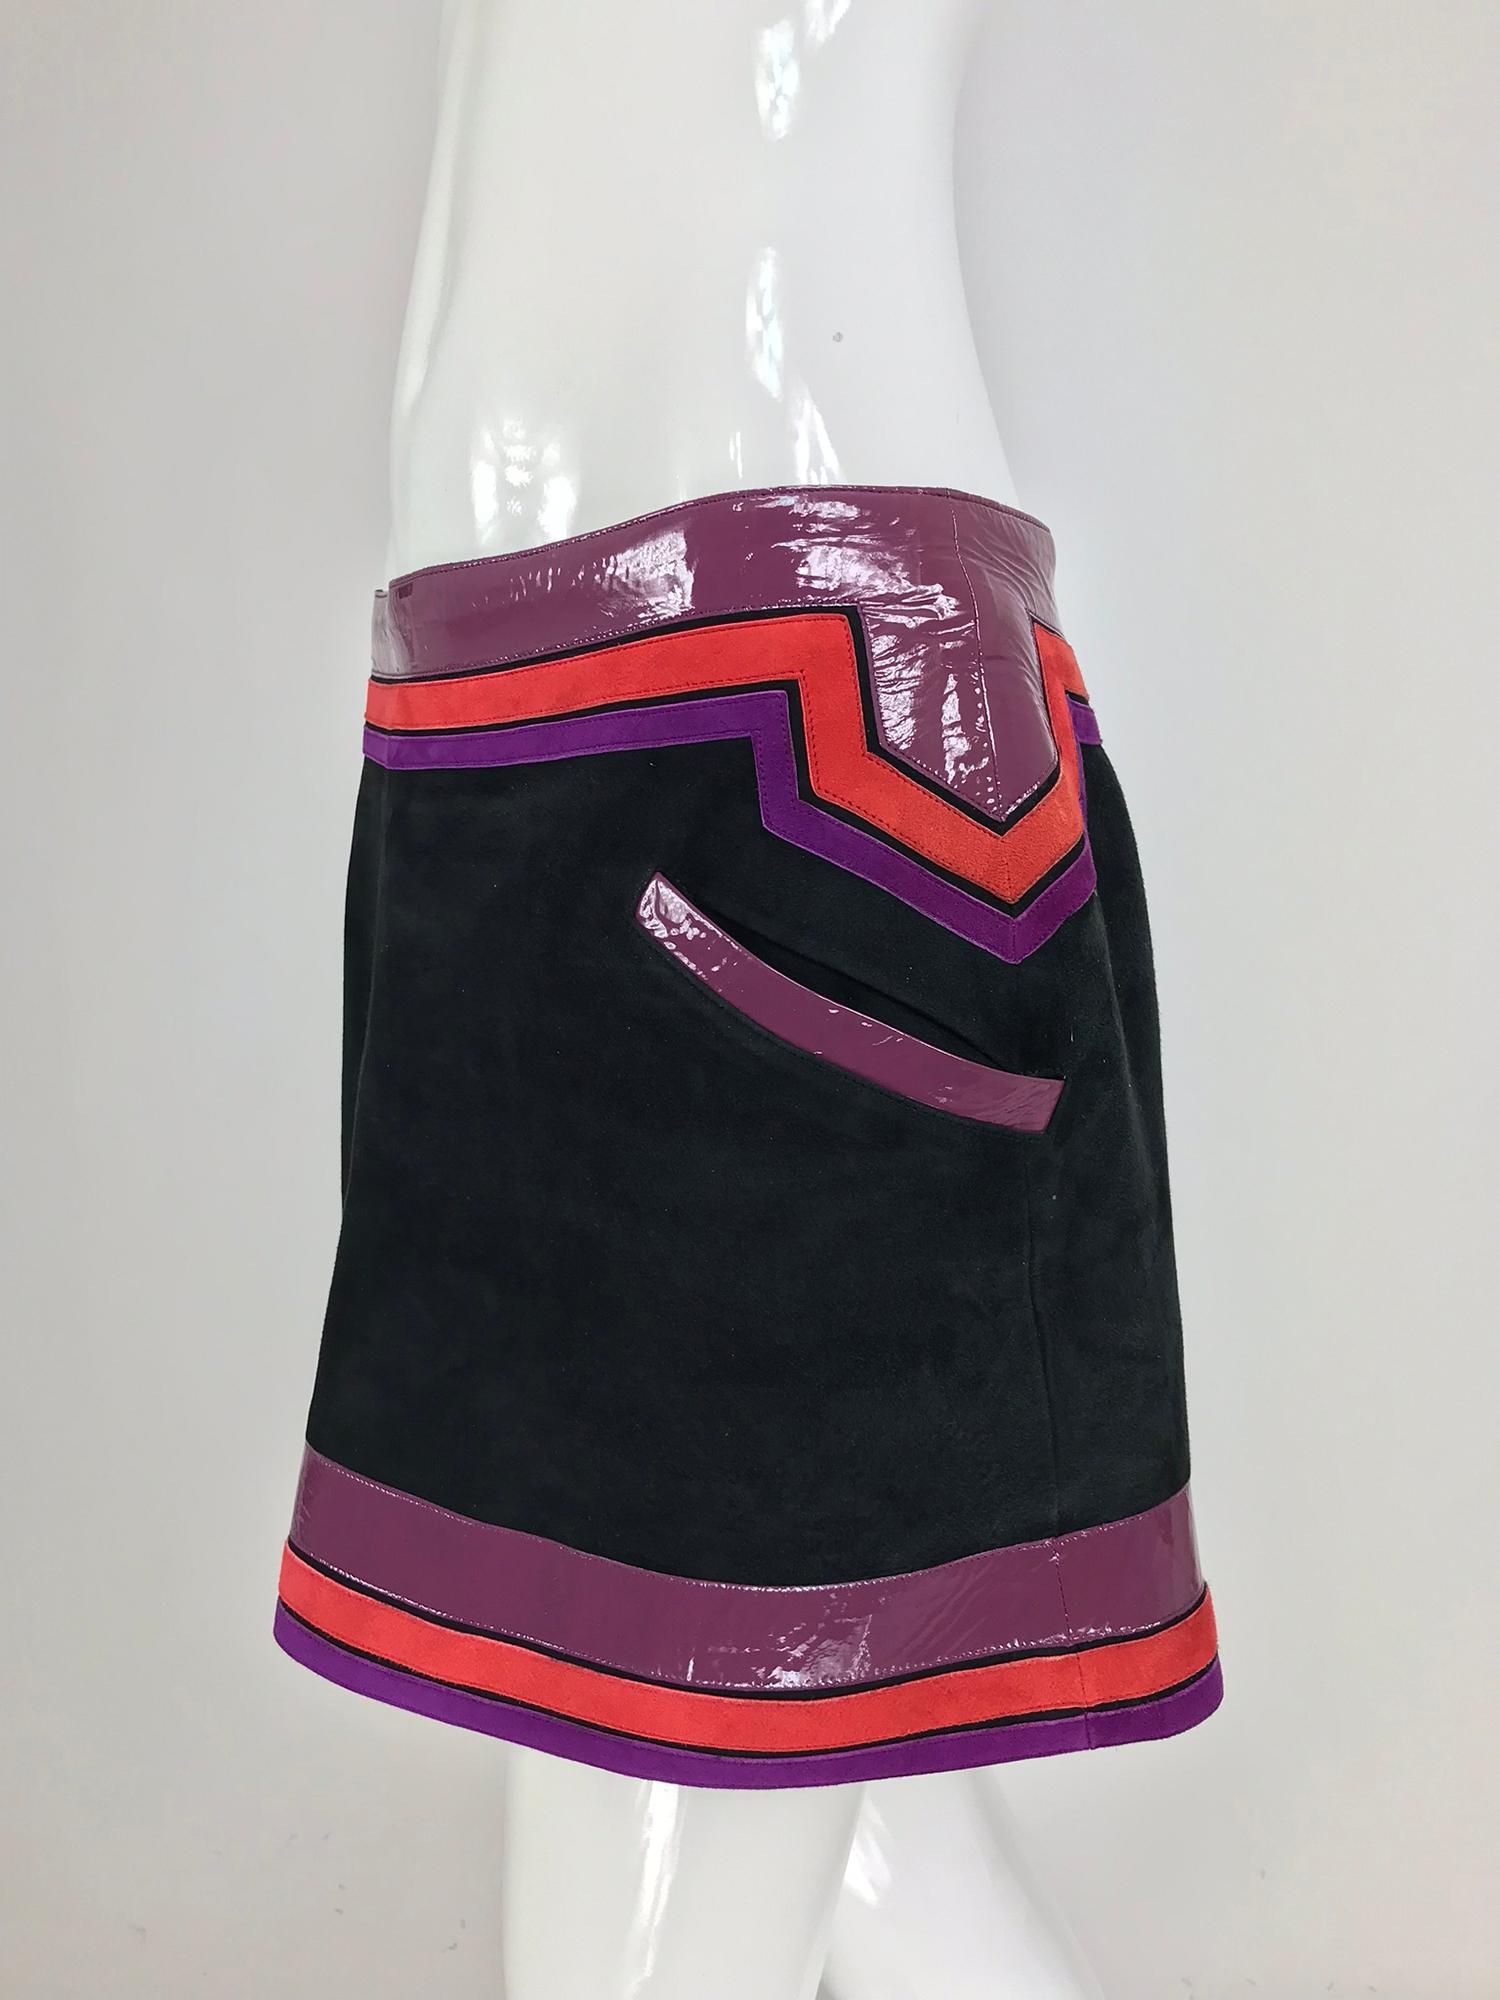 Gucci black suede skirt purple and red patent leather trim S/S 2007.  Hip hugging mini skirt of black suede with narrow bands of red and purple sued and wide bands and pocket trims of purple patent leather. Angled front pockets. The skirt is fully